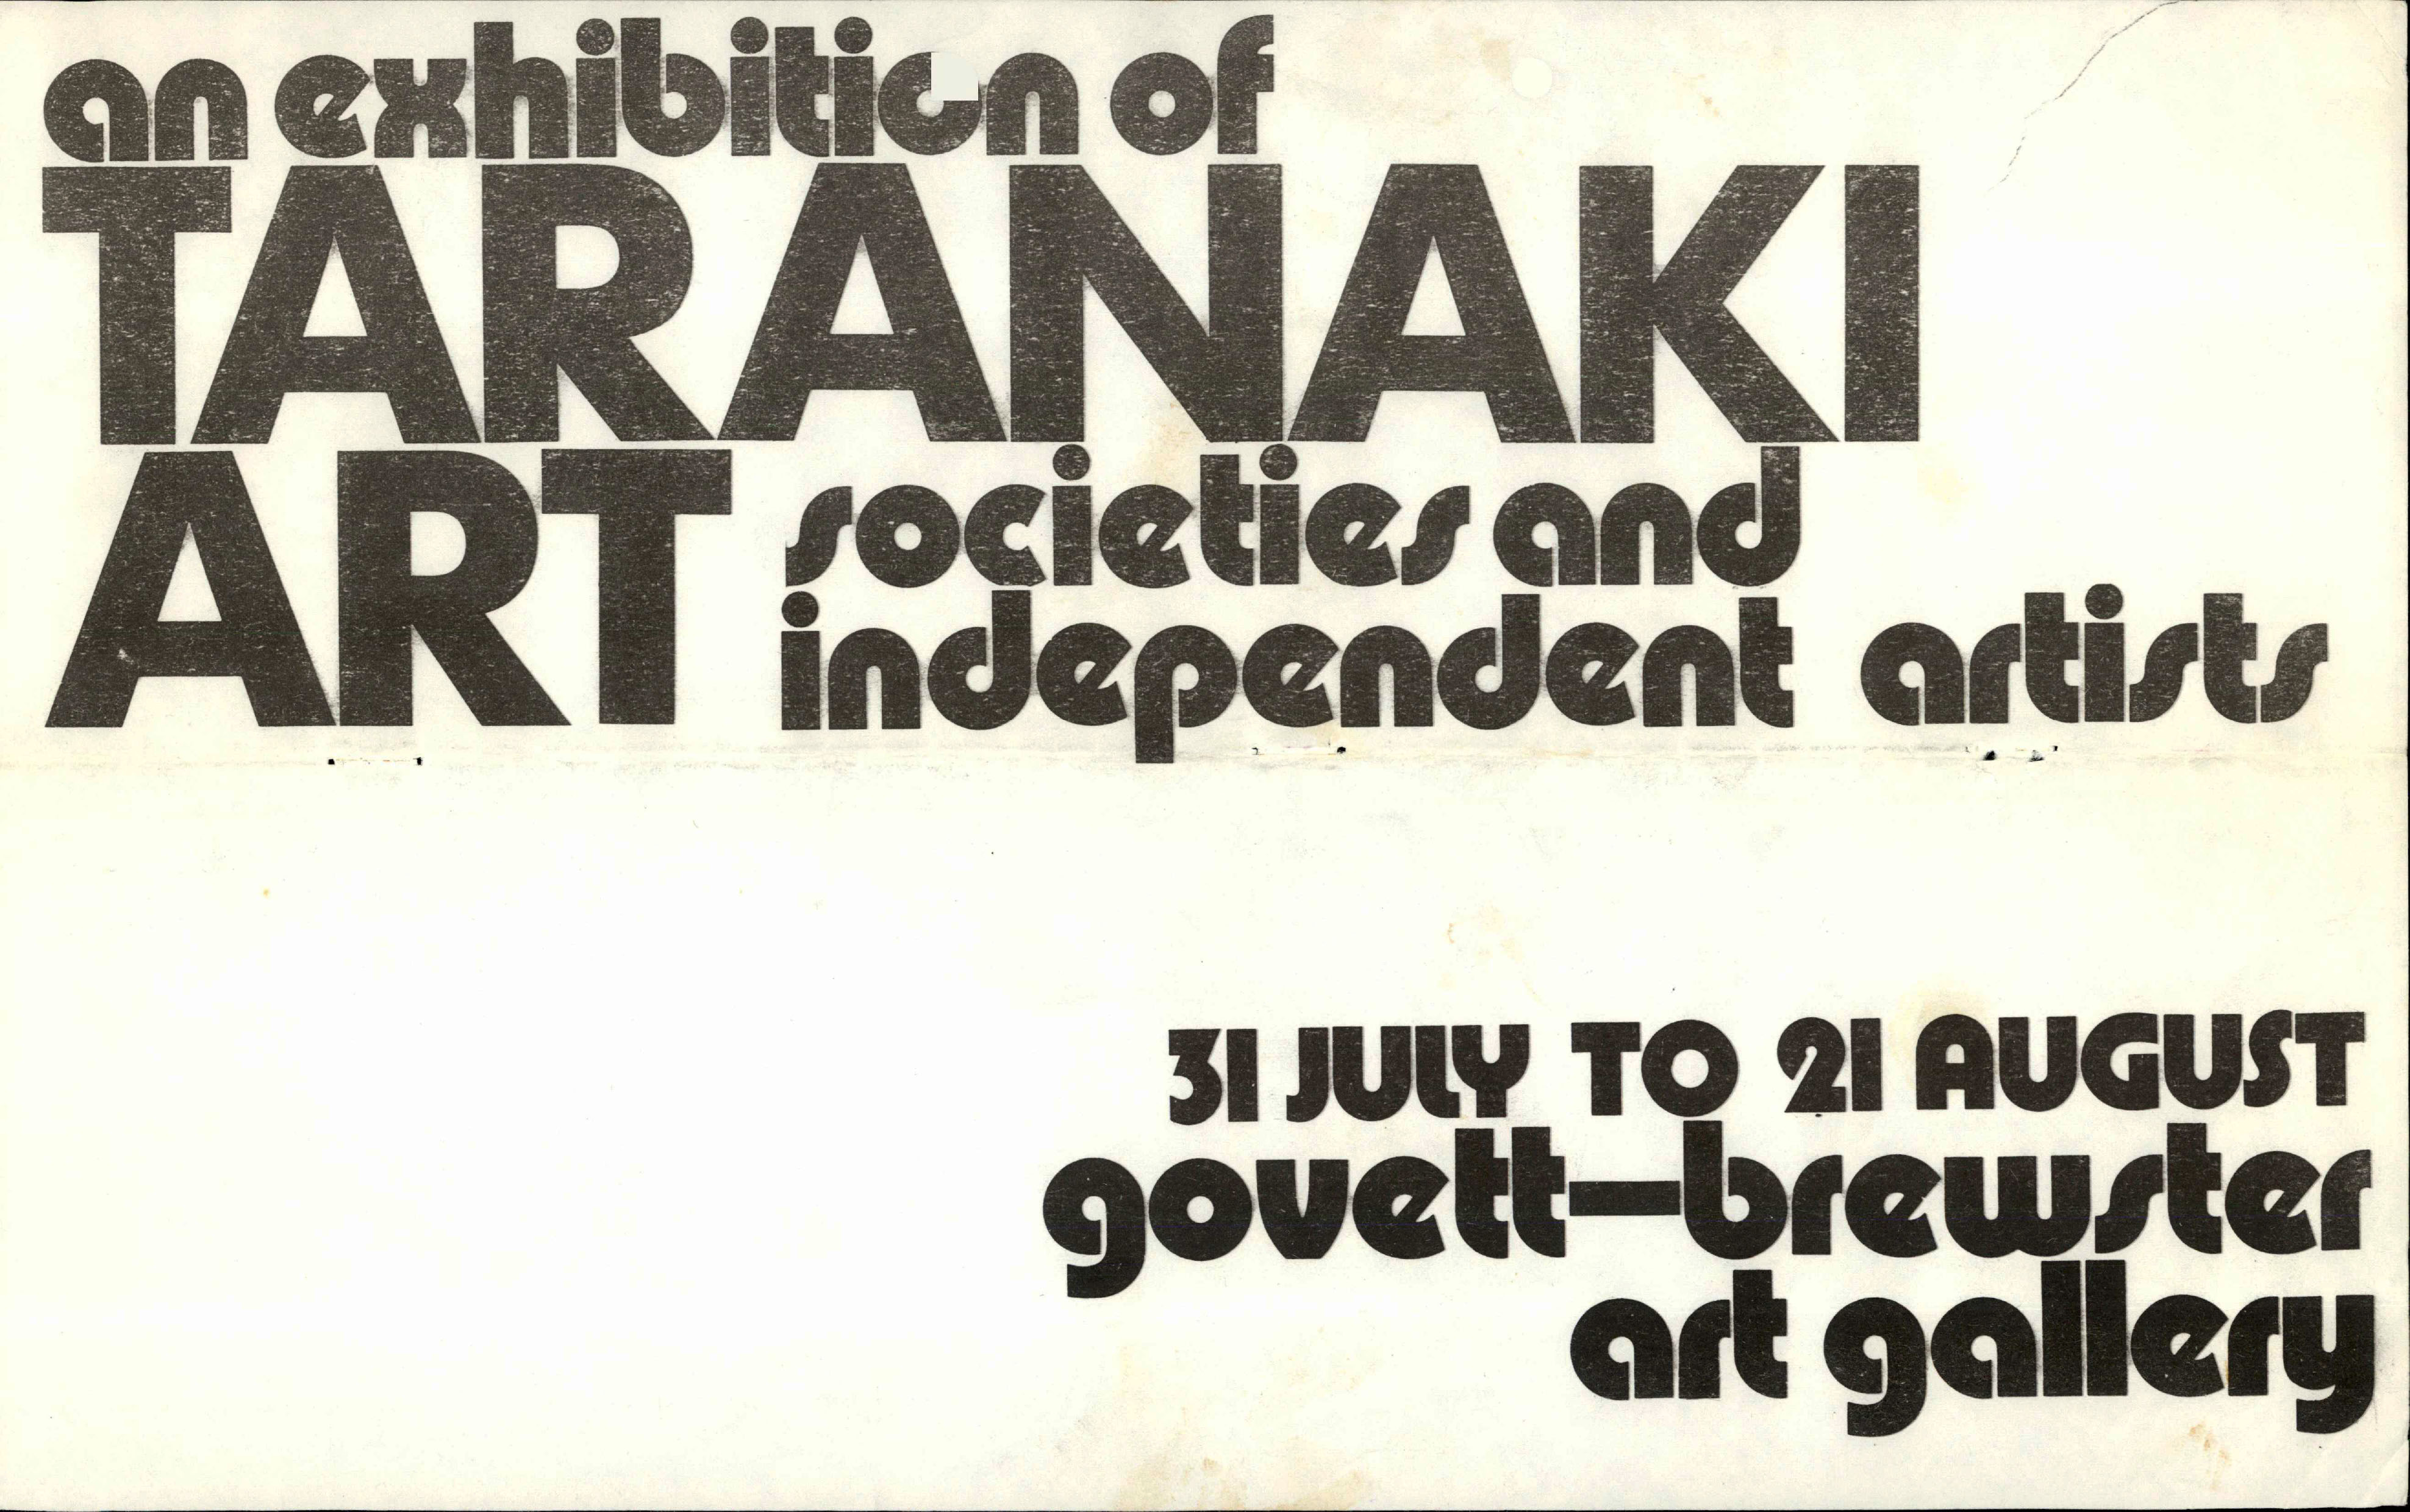 Cover image of the catalogue to An Exhibition of Taranaki Art Societies and Independent Artists, held at the Govett-Brewster Art Gallery from 31 July to 21 August 1974. Black curved writing on a white background.